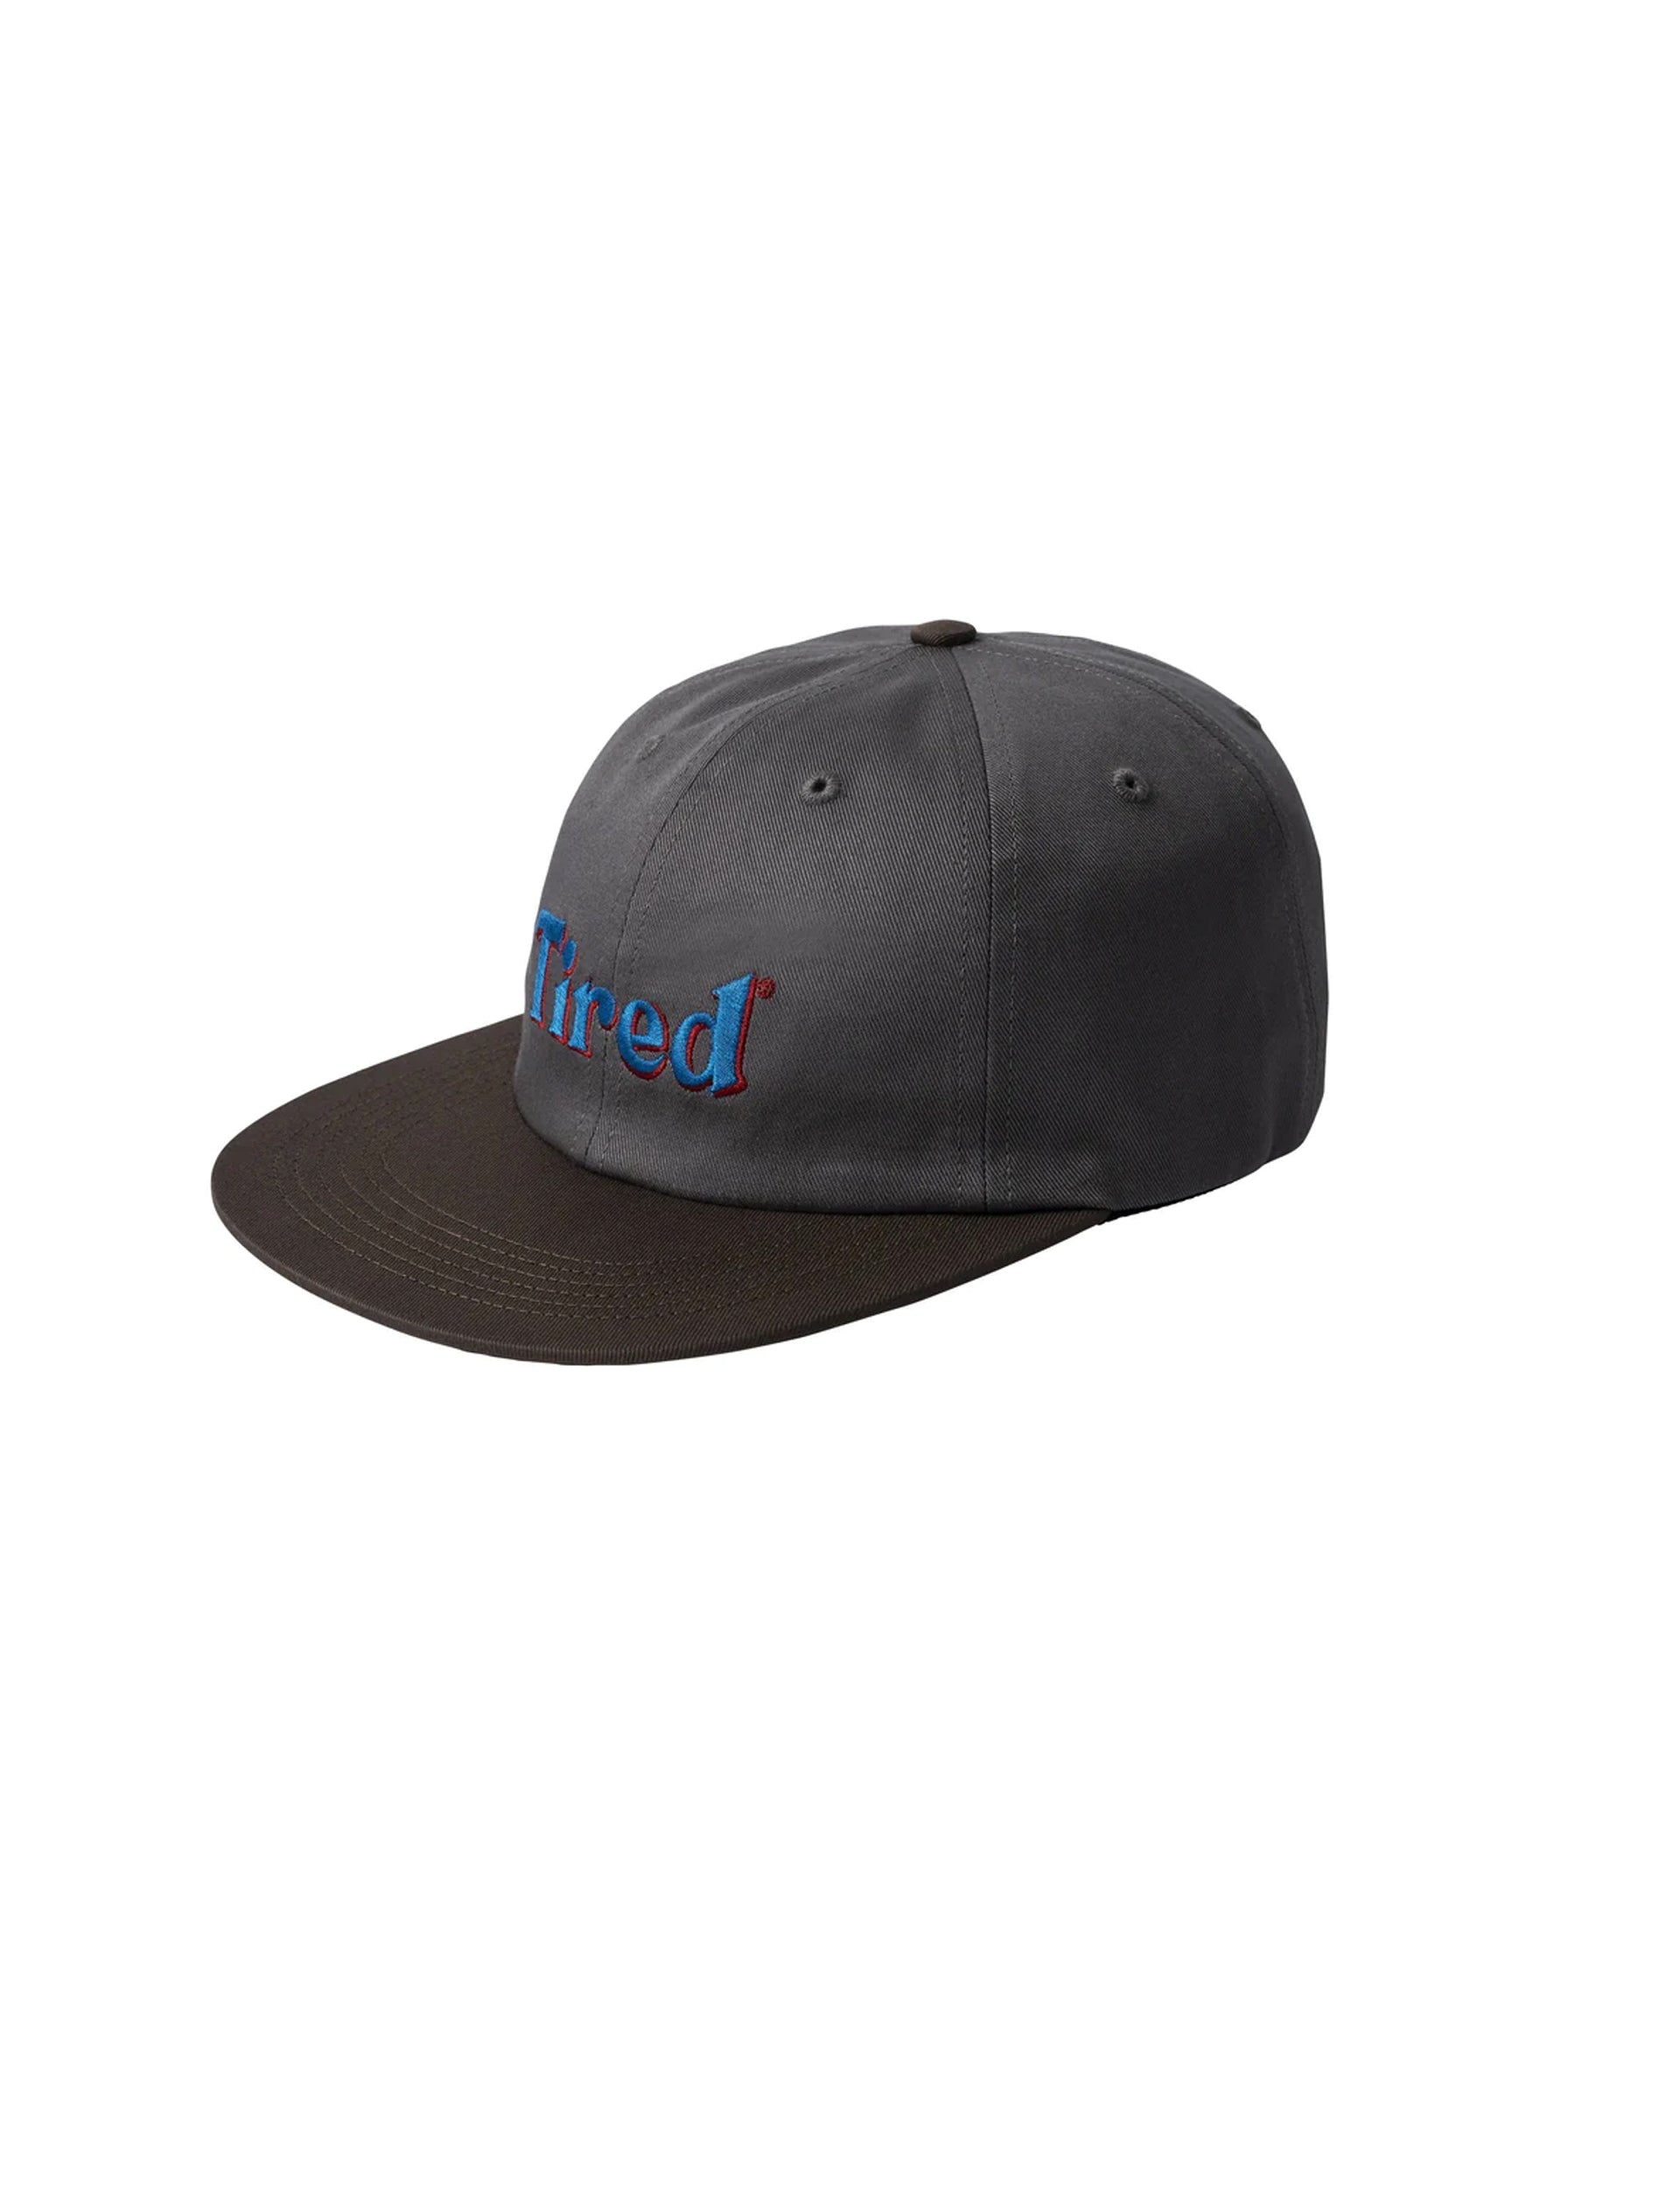 TIRED TIRED TWO TONE LOGO CAP GREY/ BROWN